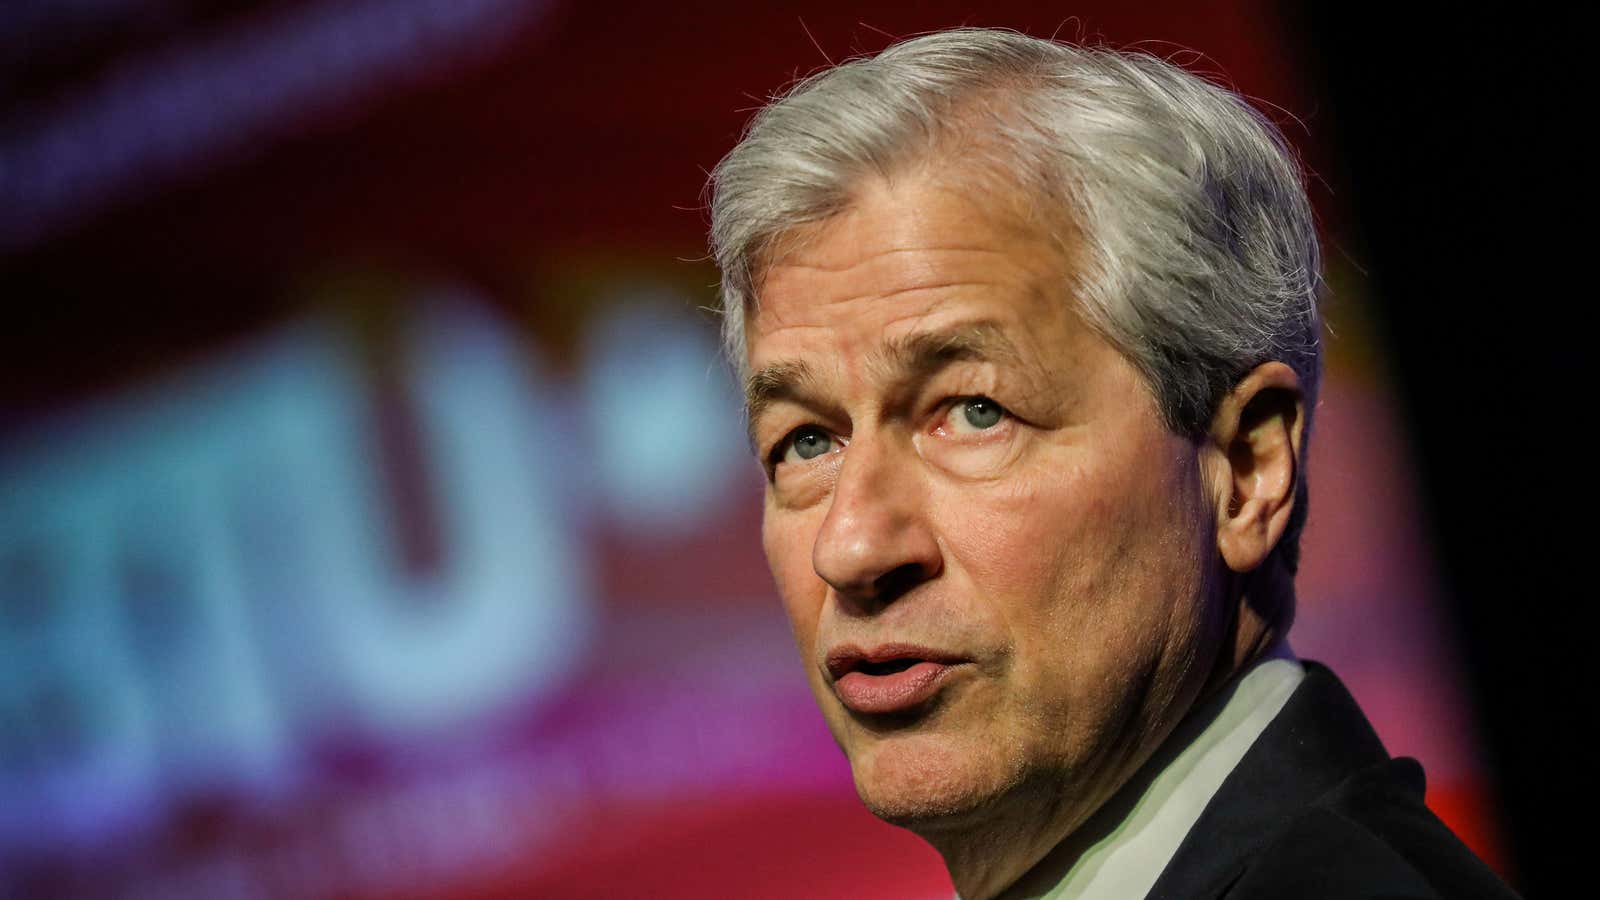 Jamie Dimon used "Latinx" and "carbon" in shareholder letter